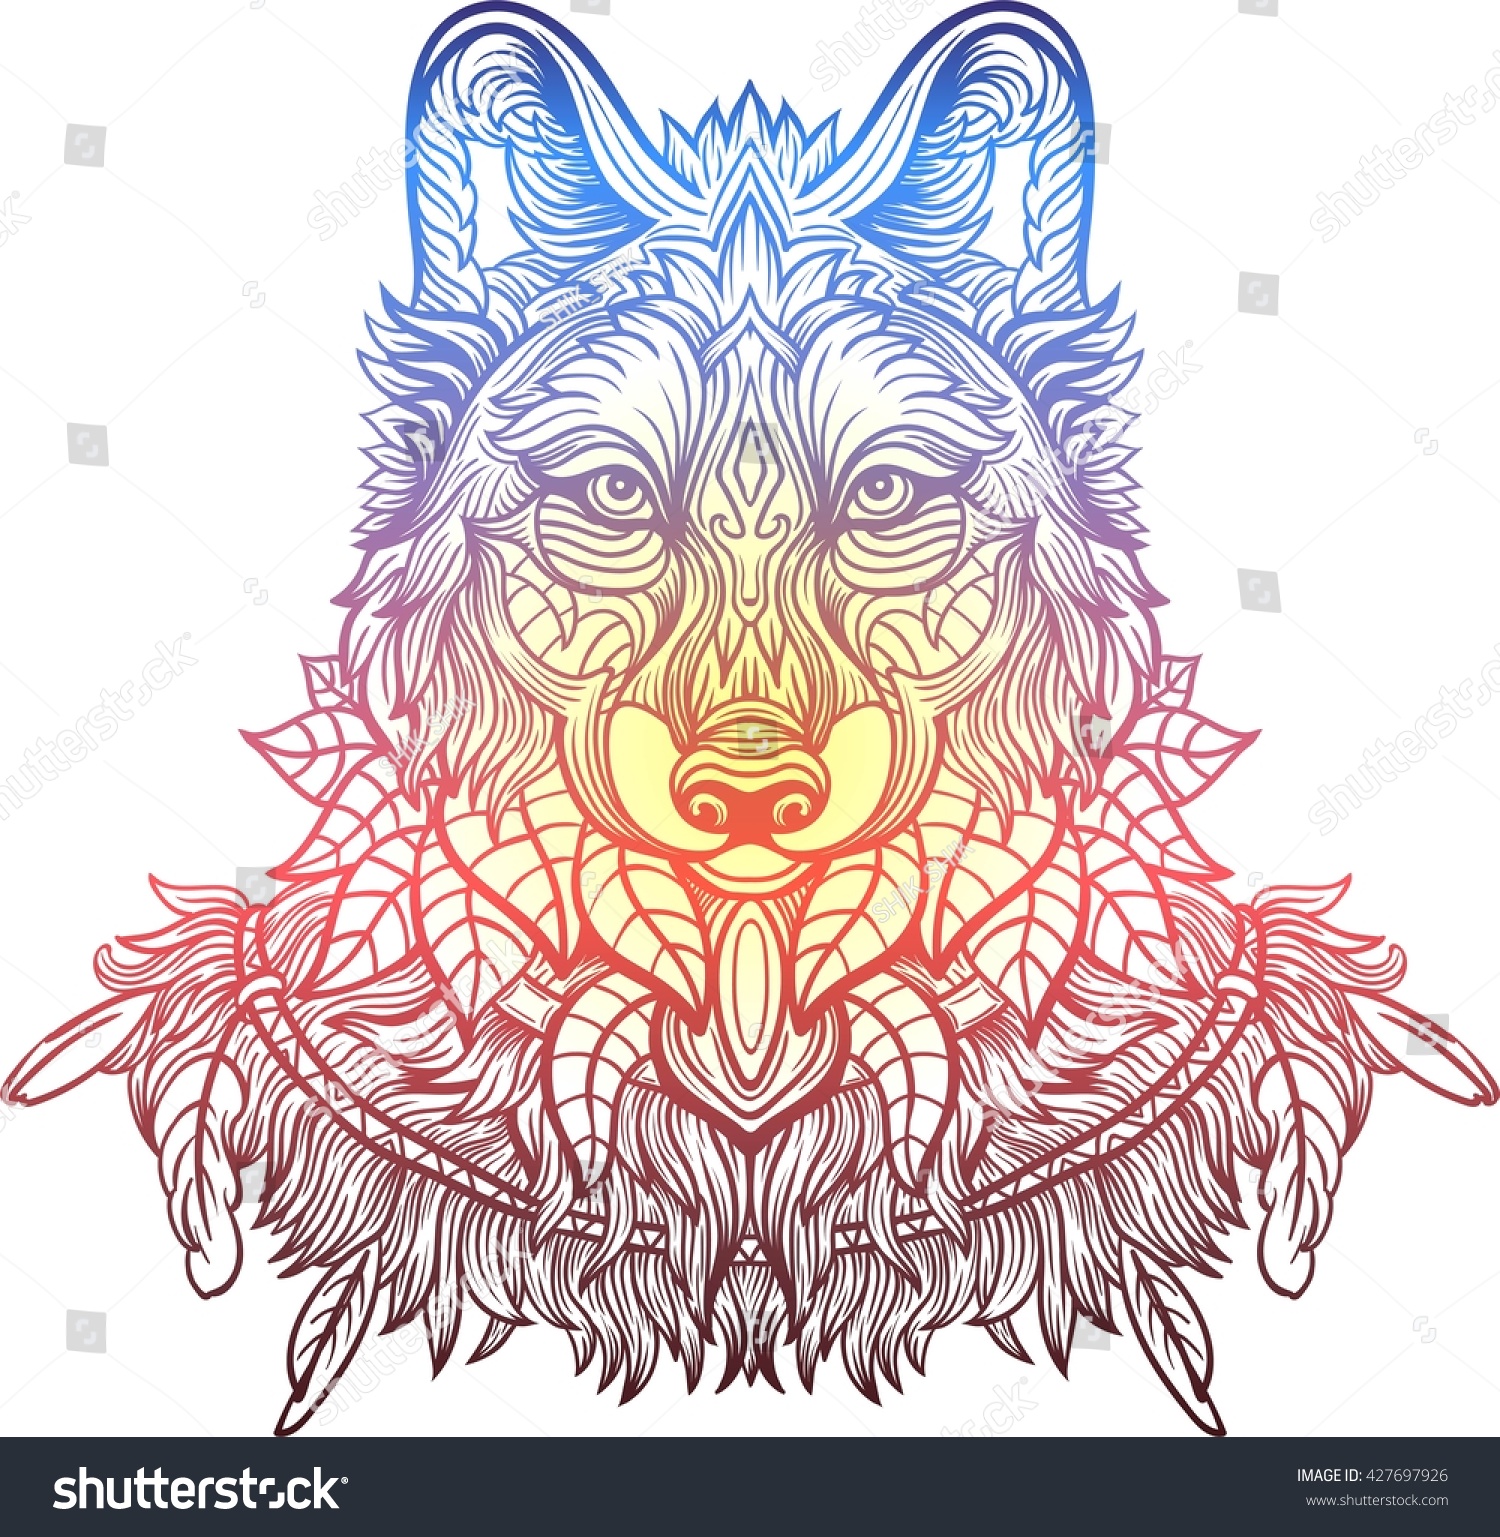 SVG of Wolf. Hand-drawn wolf with ethnic floral doodle pattern. Coloring page - zendala, design for tattoo, t-shirt print svg